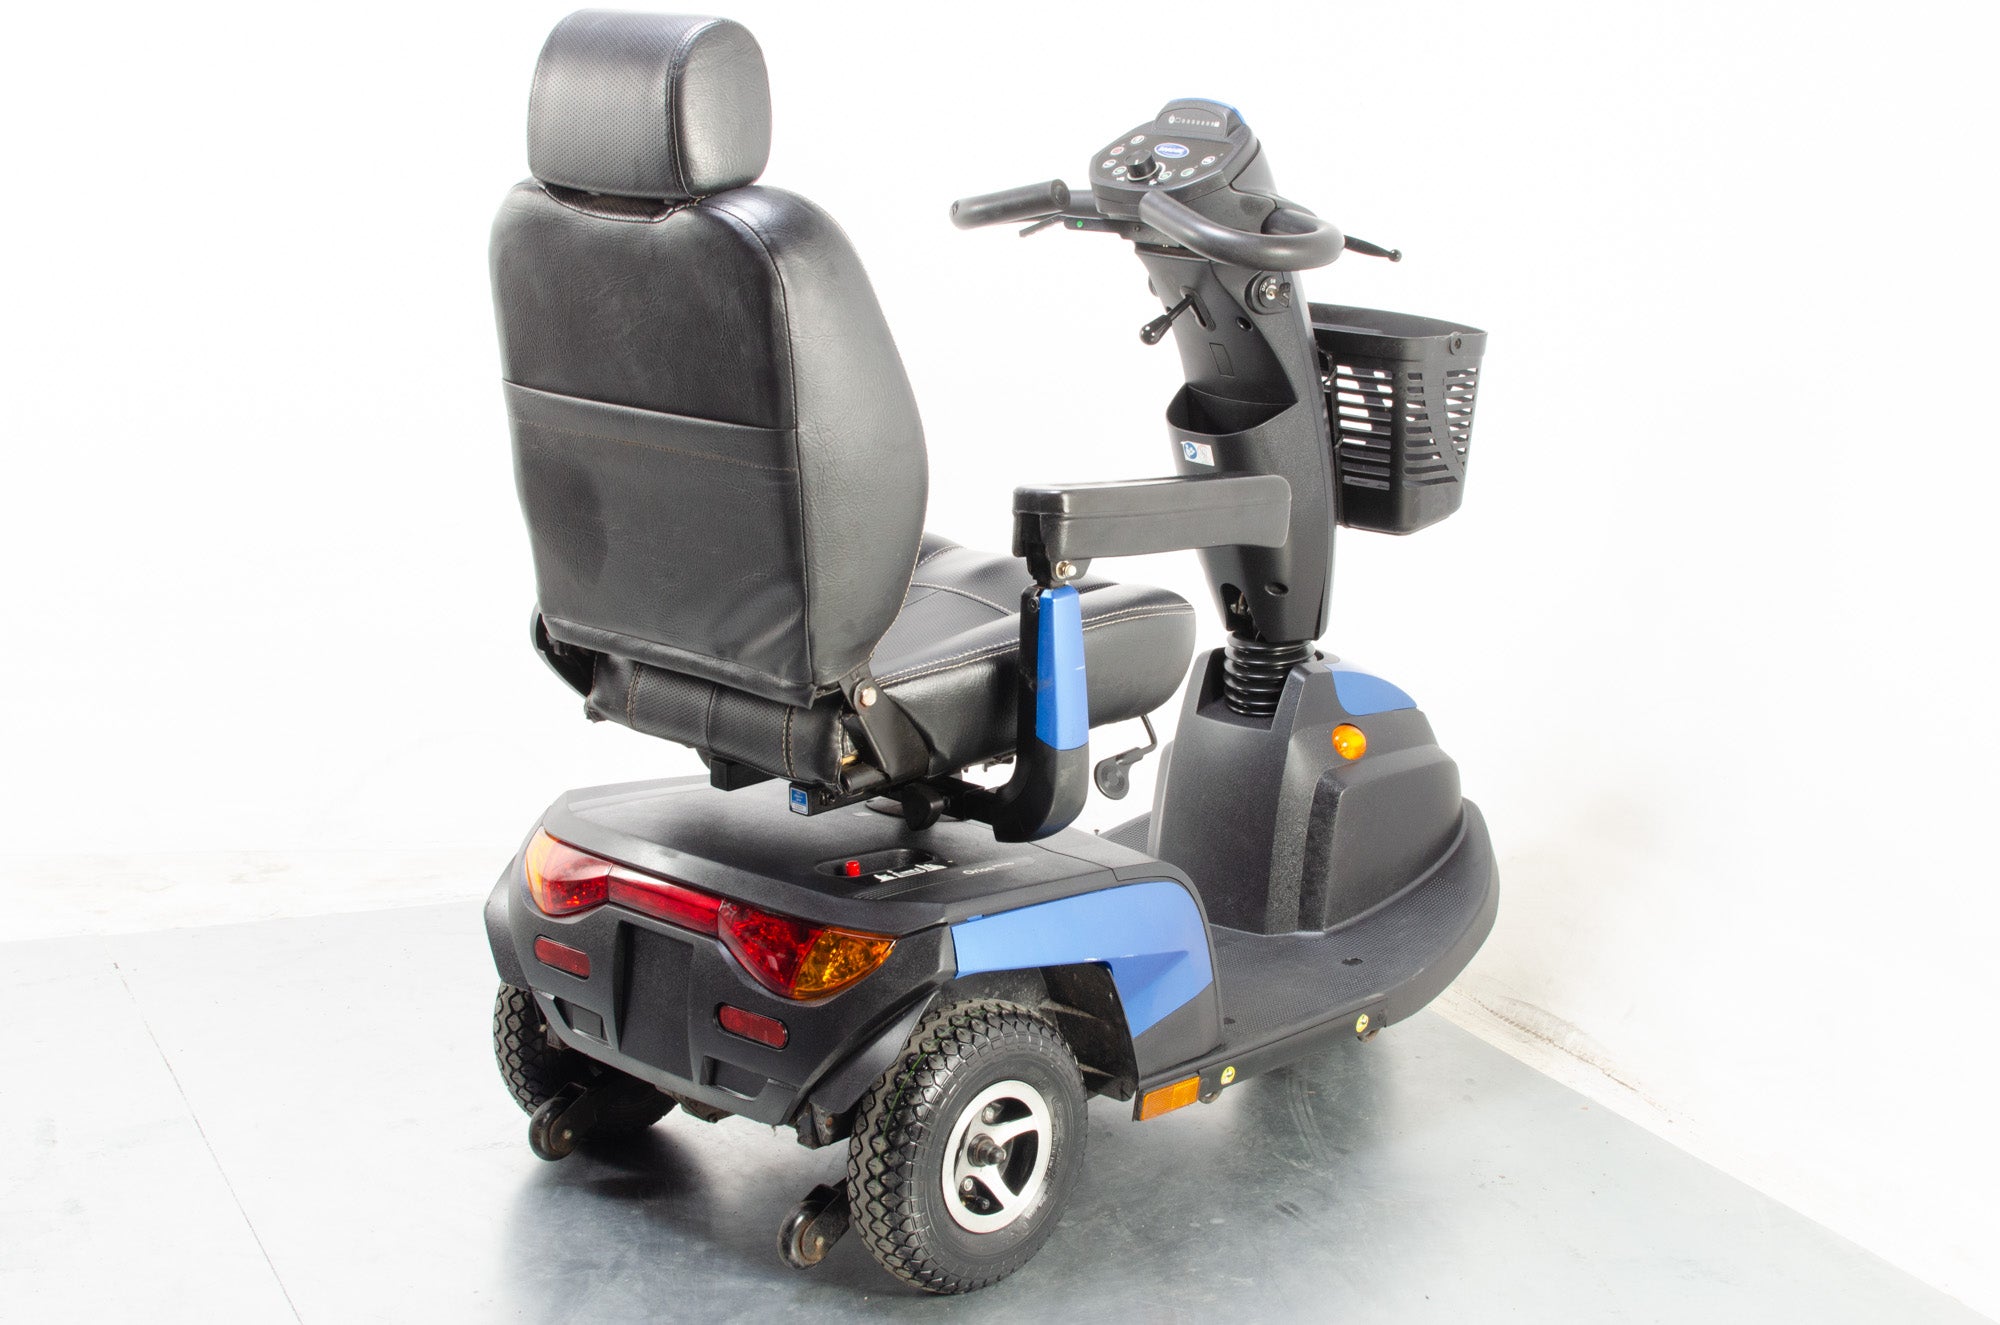 Invacare Orion Metro 8mph Used Electric Mobility Scooter Trike 3-Wheel Suspension Road